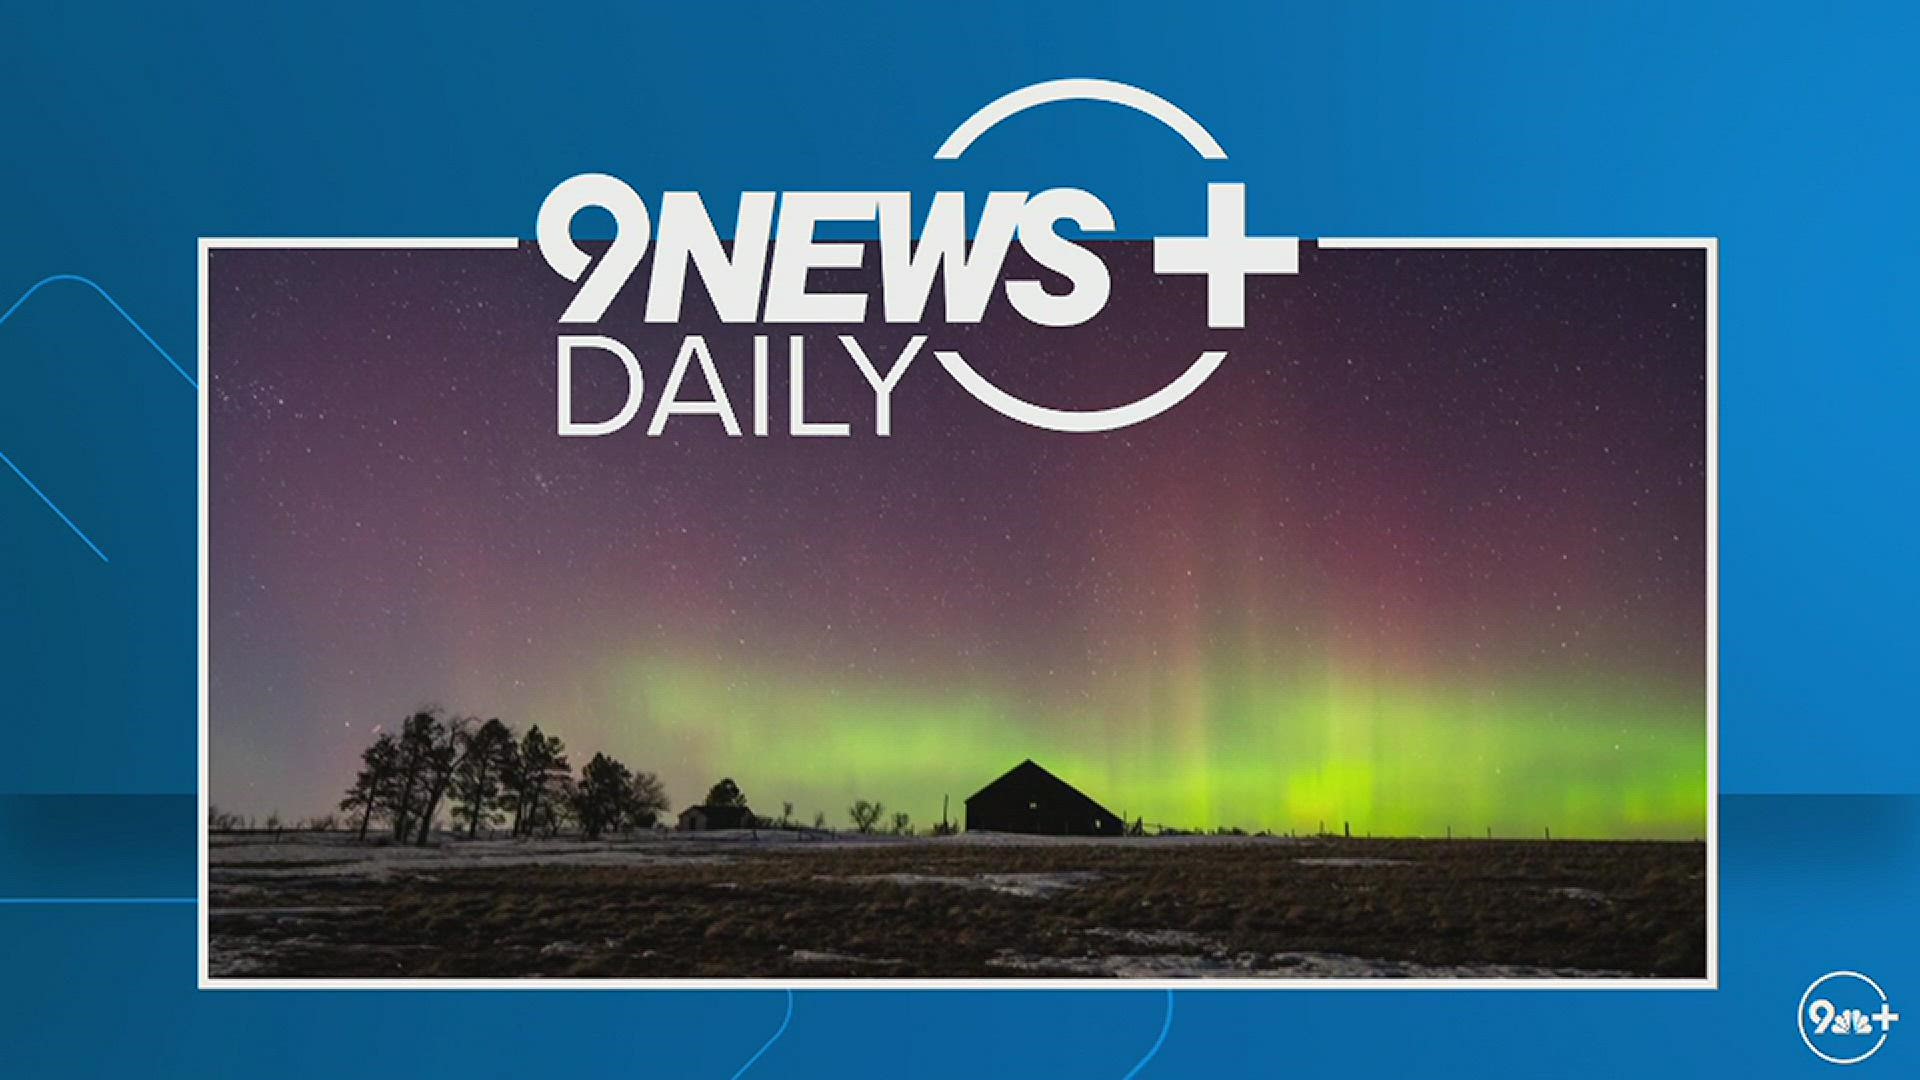 The National Weather Service (NWS) said the opportunity Monday was the best chance for Coloradans to see the Northern Lights in a long time.